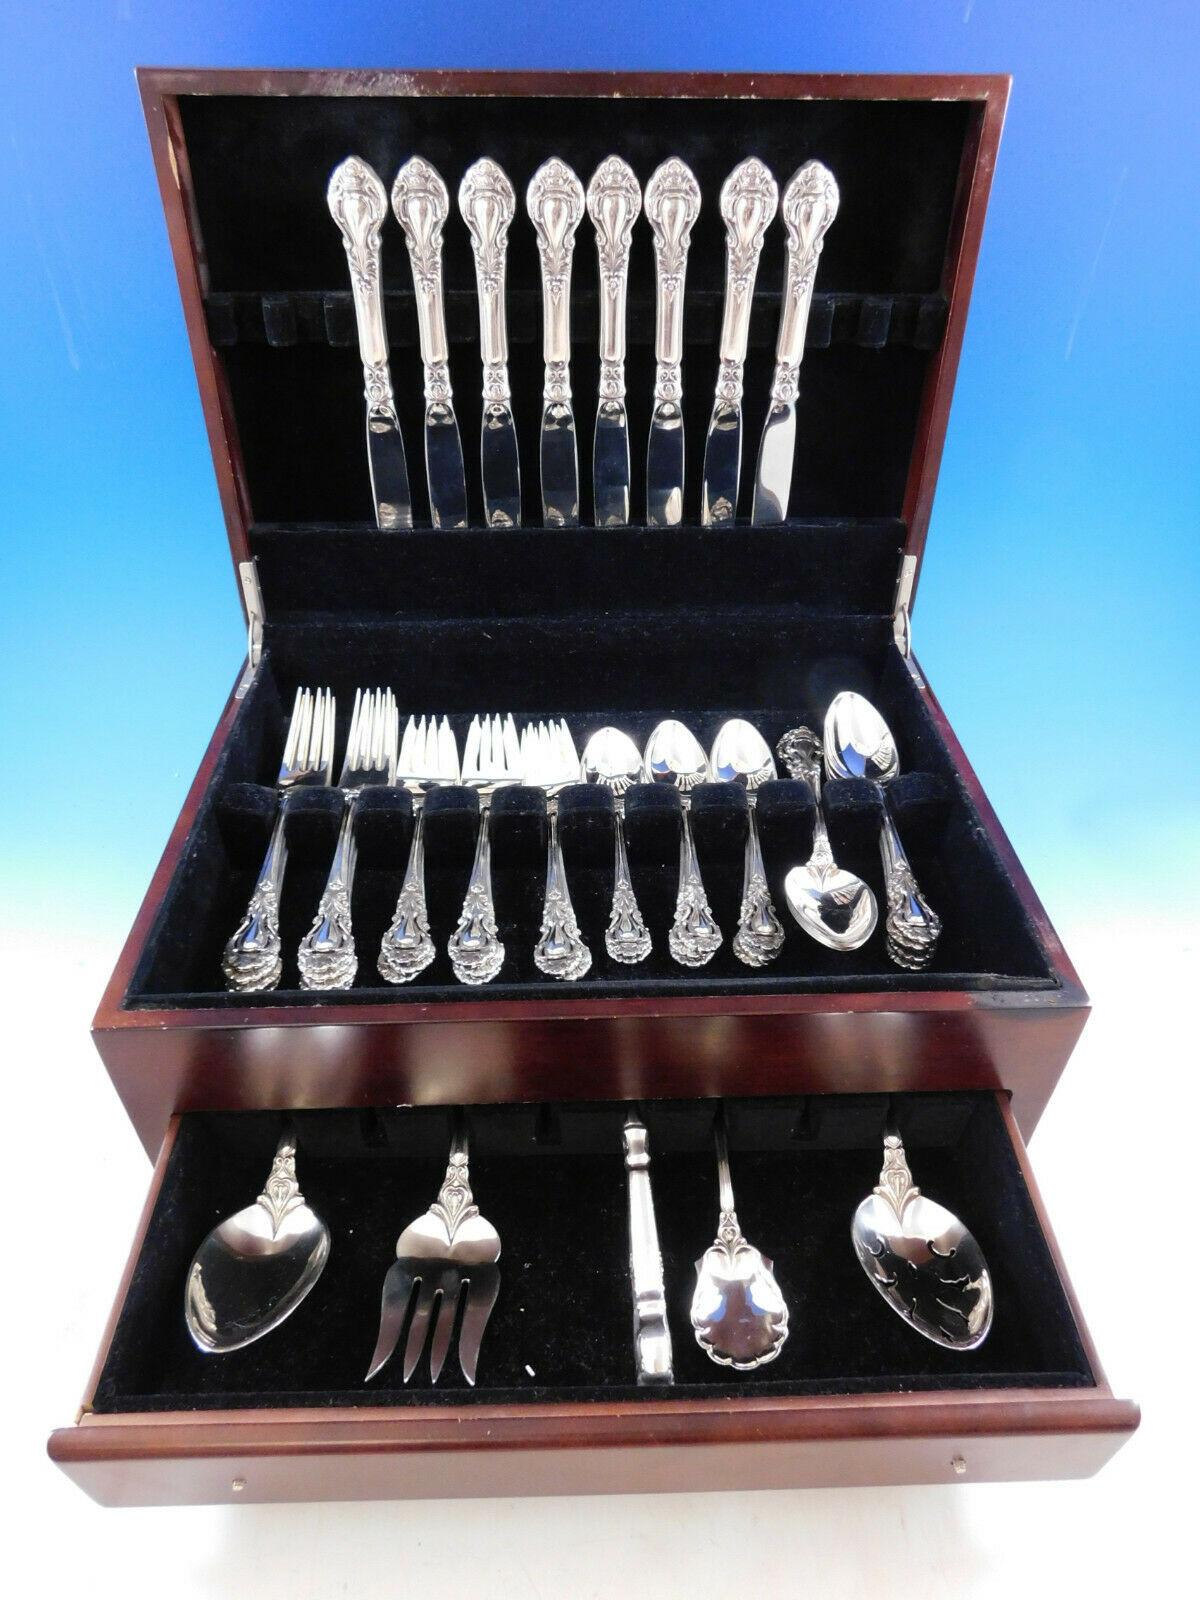 Royal Dynasty by Kirk - Stieff sterling silver flatware set, 45 pieces. This set includes:

8 place knives, 9 1/8